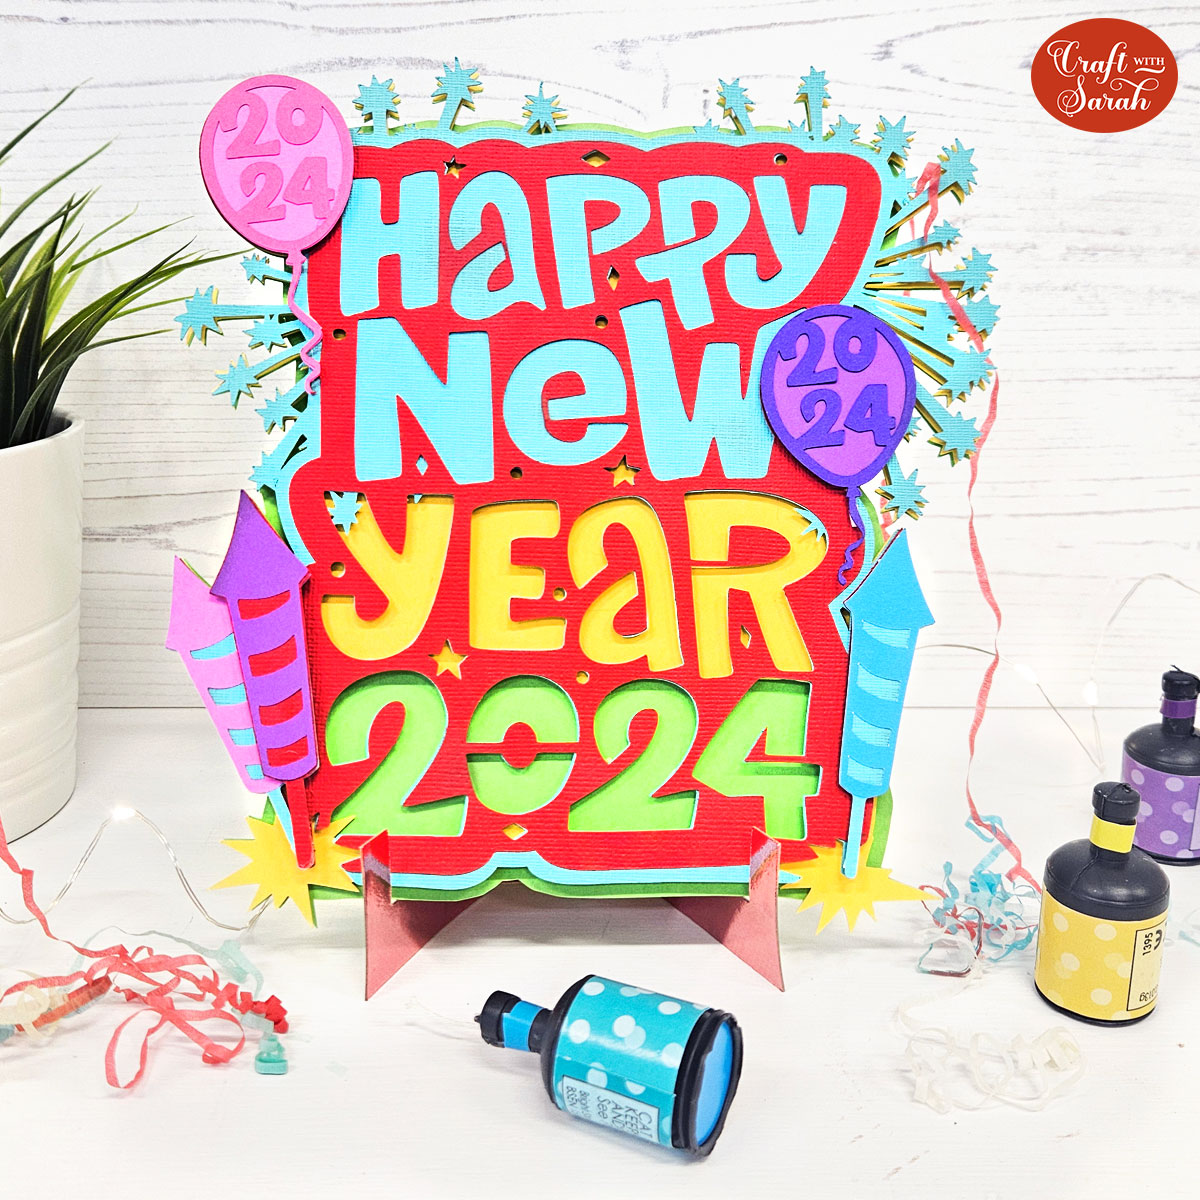 Happy New Year 2024 pictures & Images Download Free